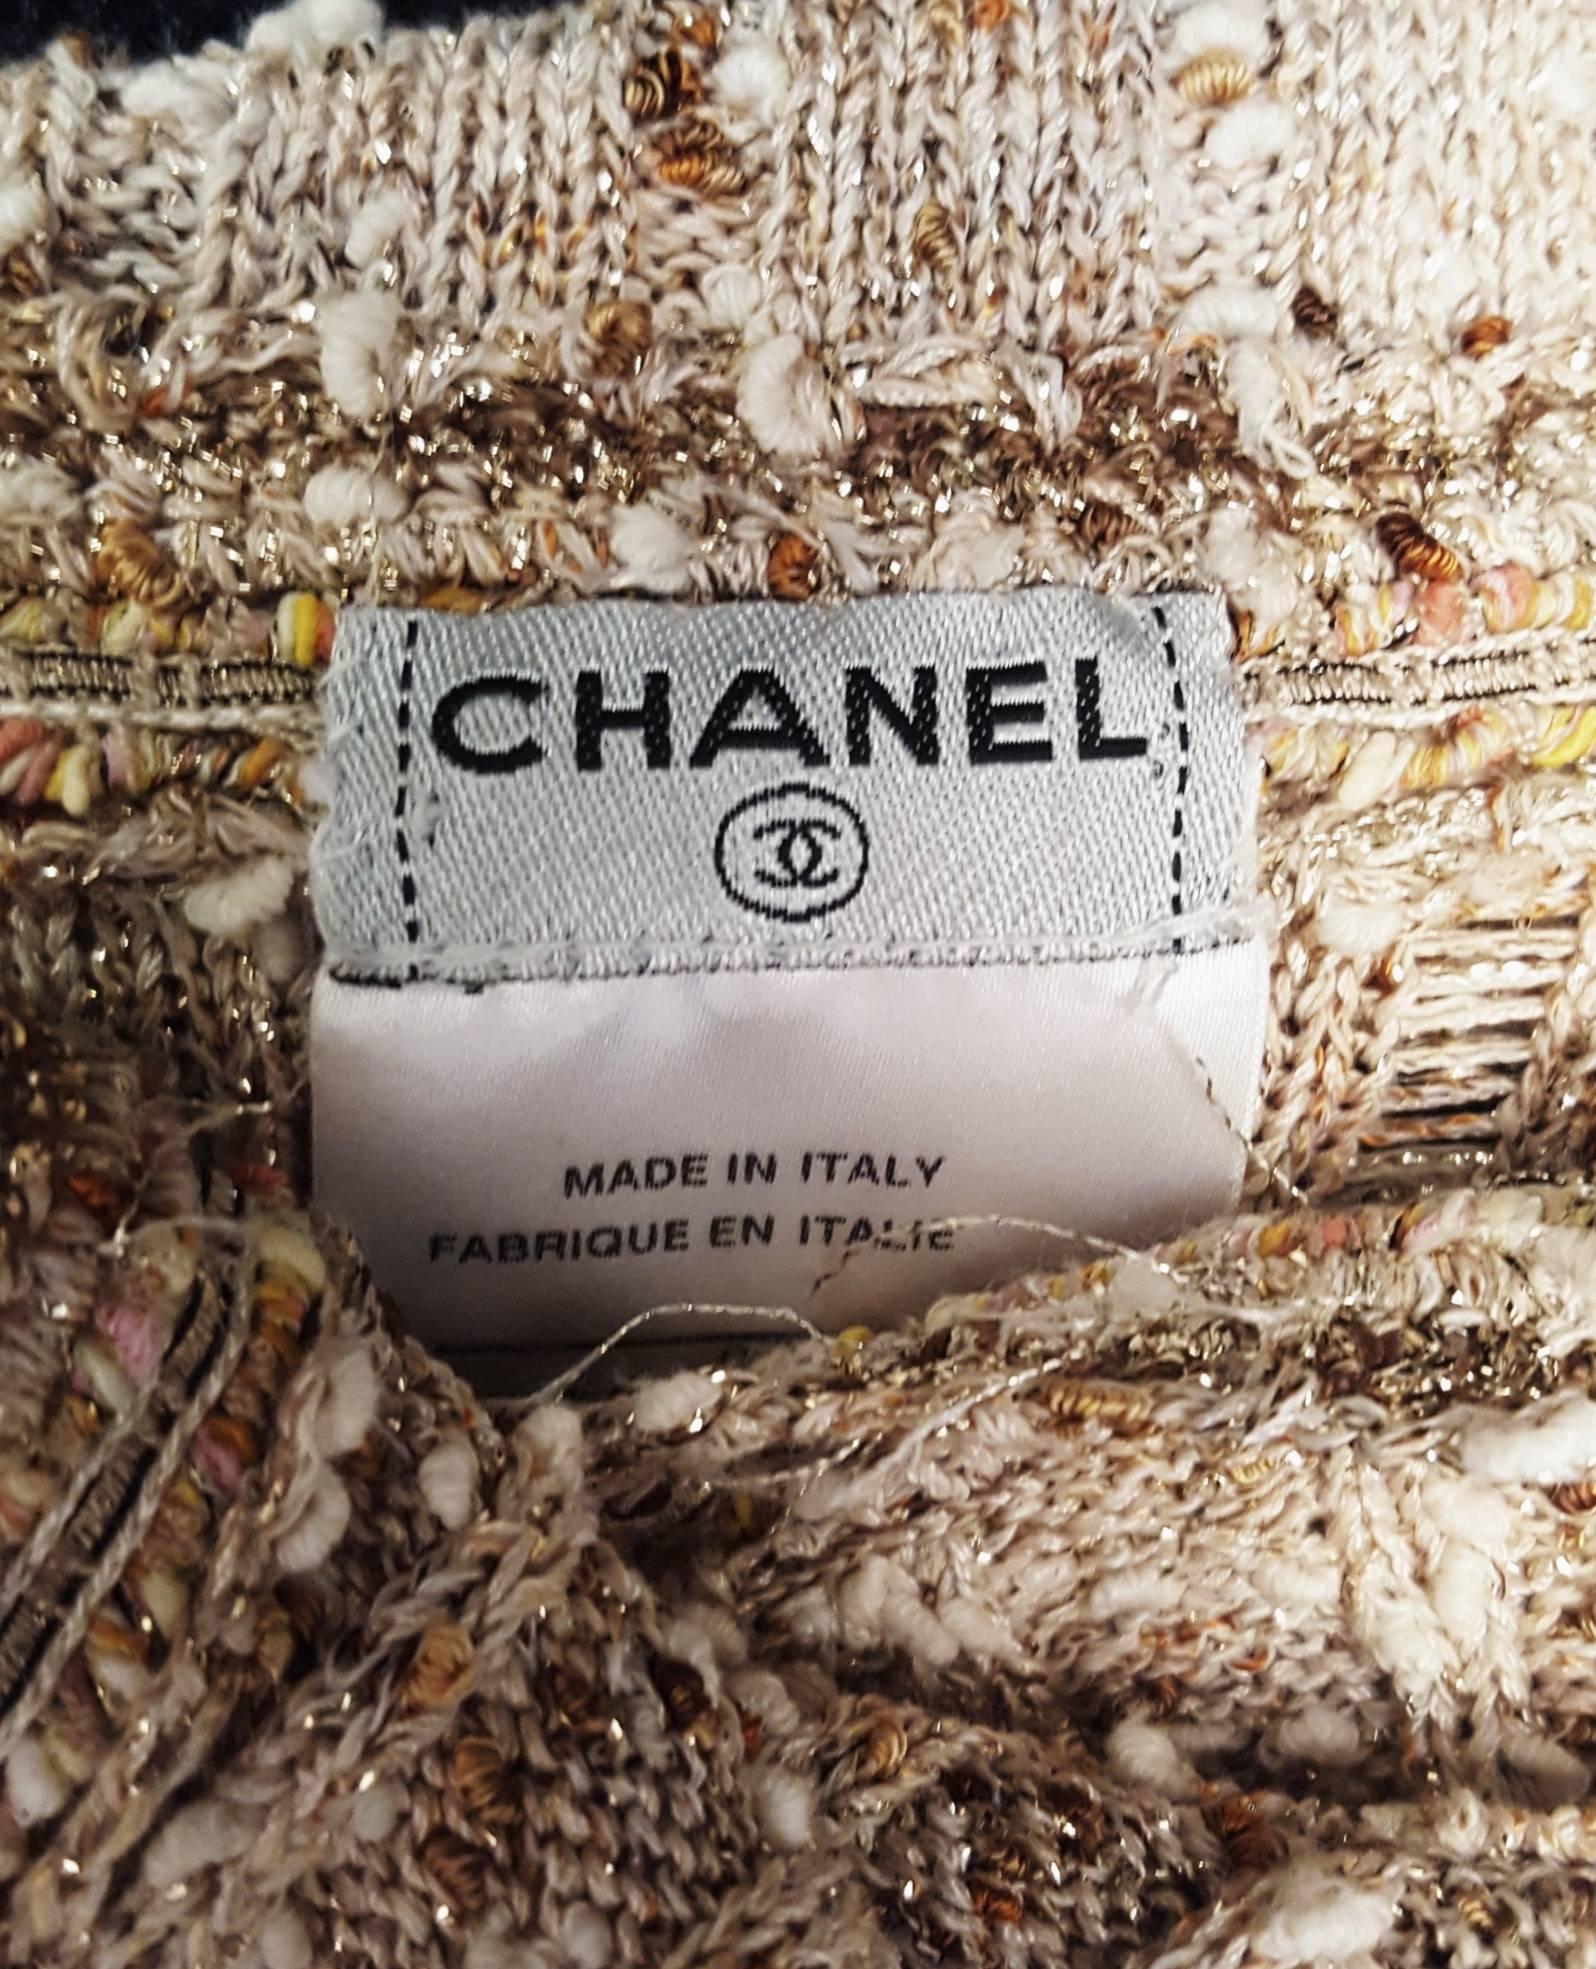 Chanel Beige, Copper & Gold Tone Cotton Blend Knit Sweater Jacket from Spring 06 2